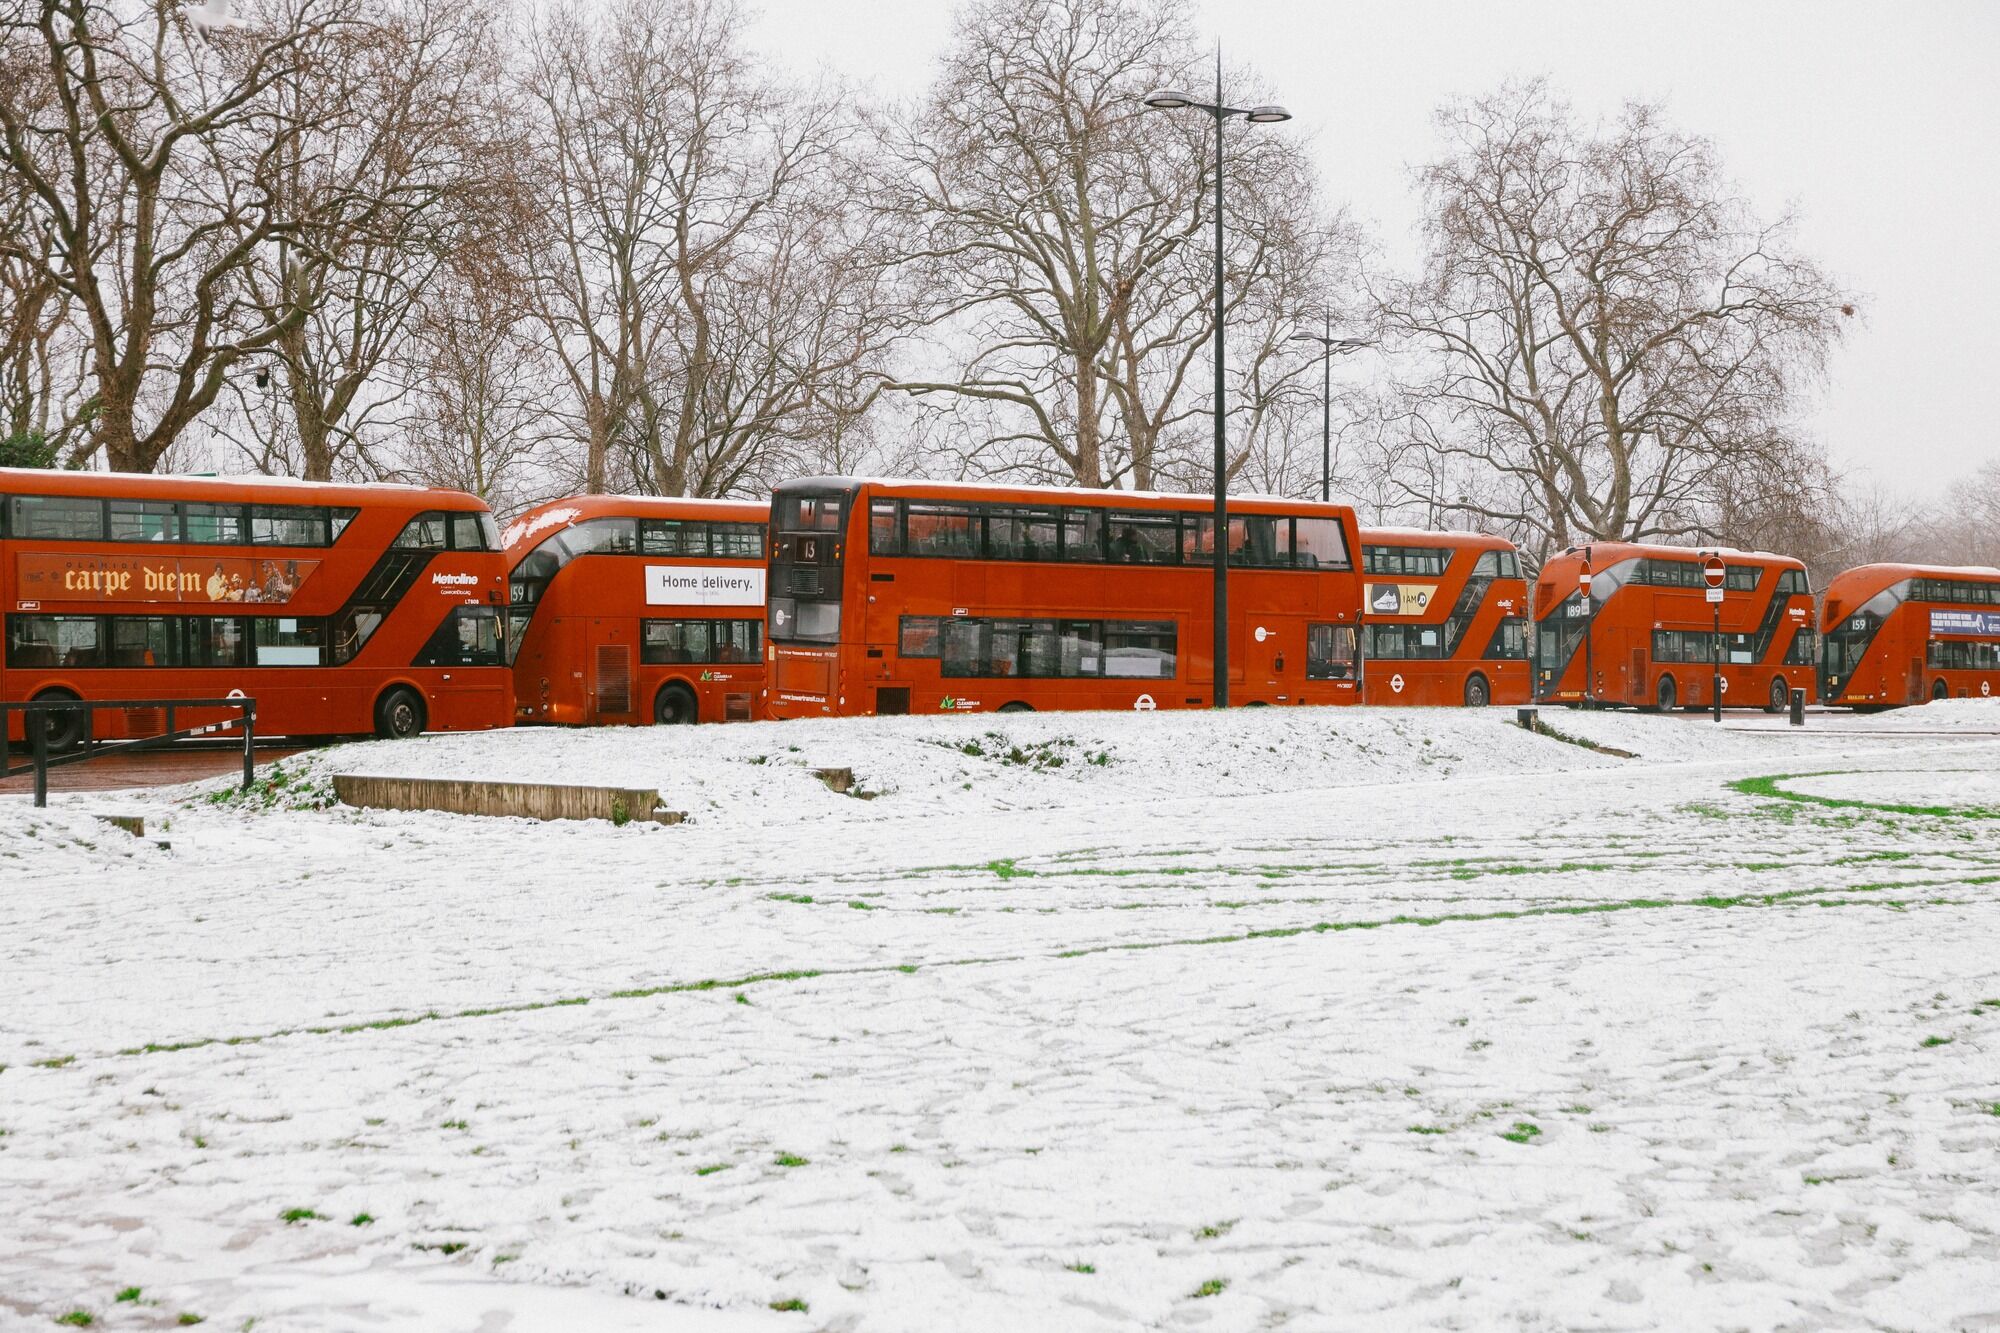 Snow is expected in London: the Met Office has issued a yellow warning